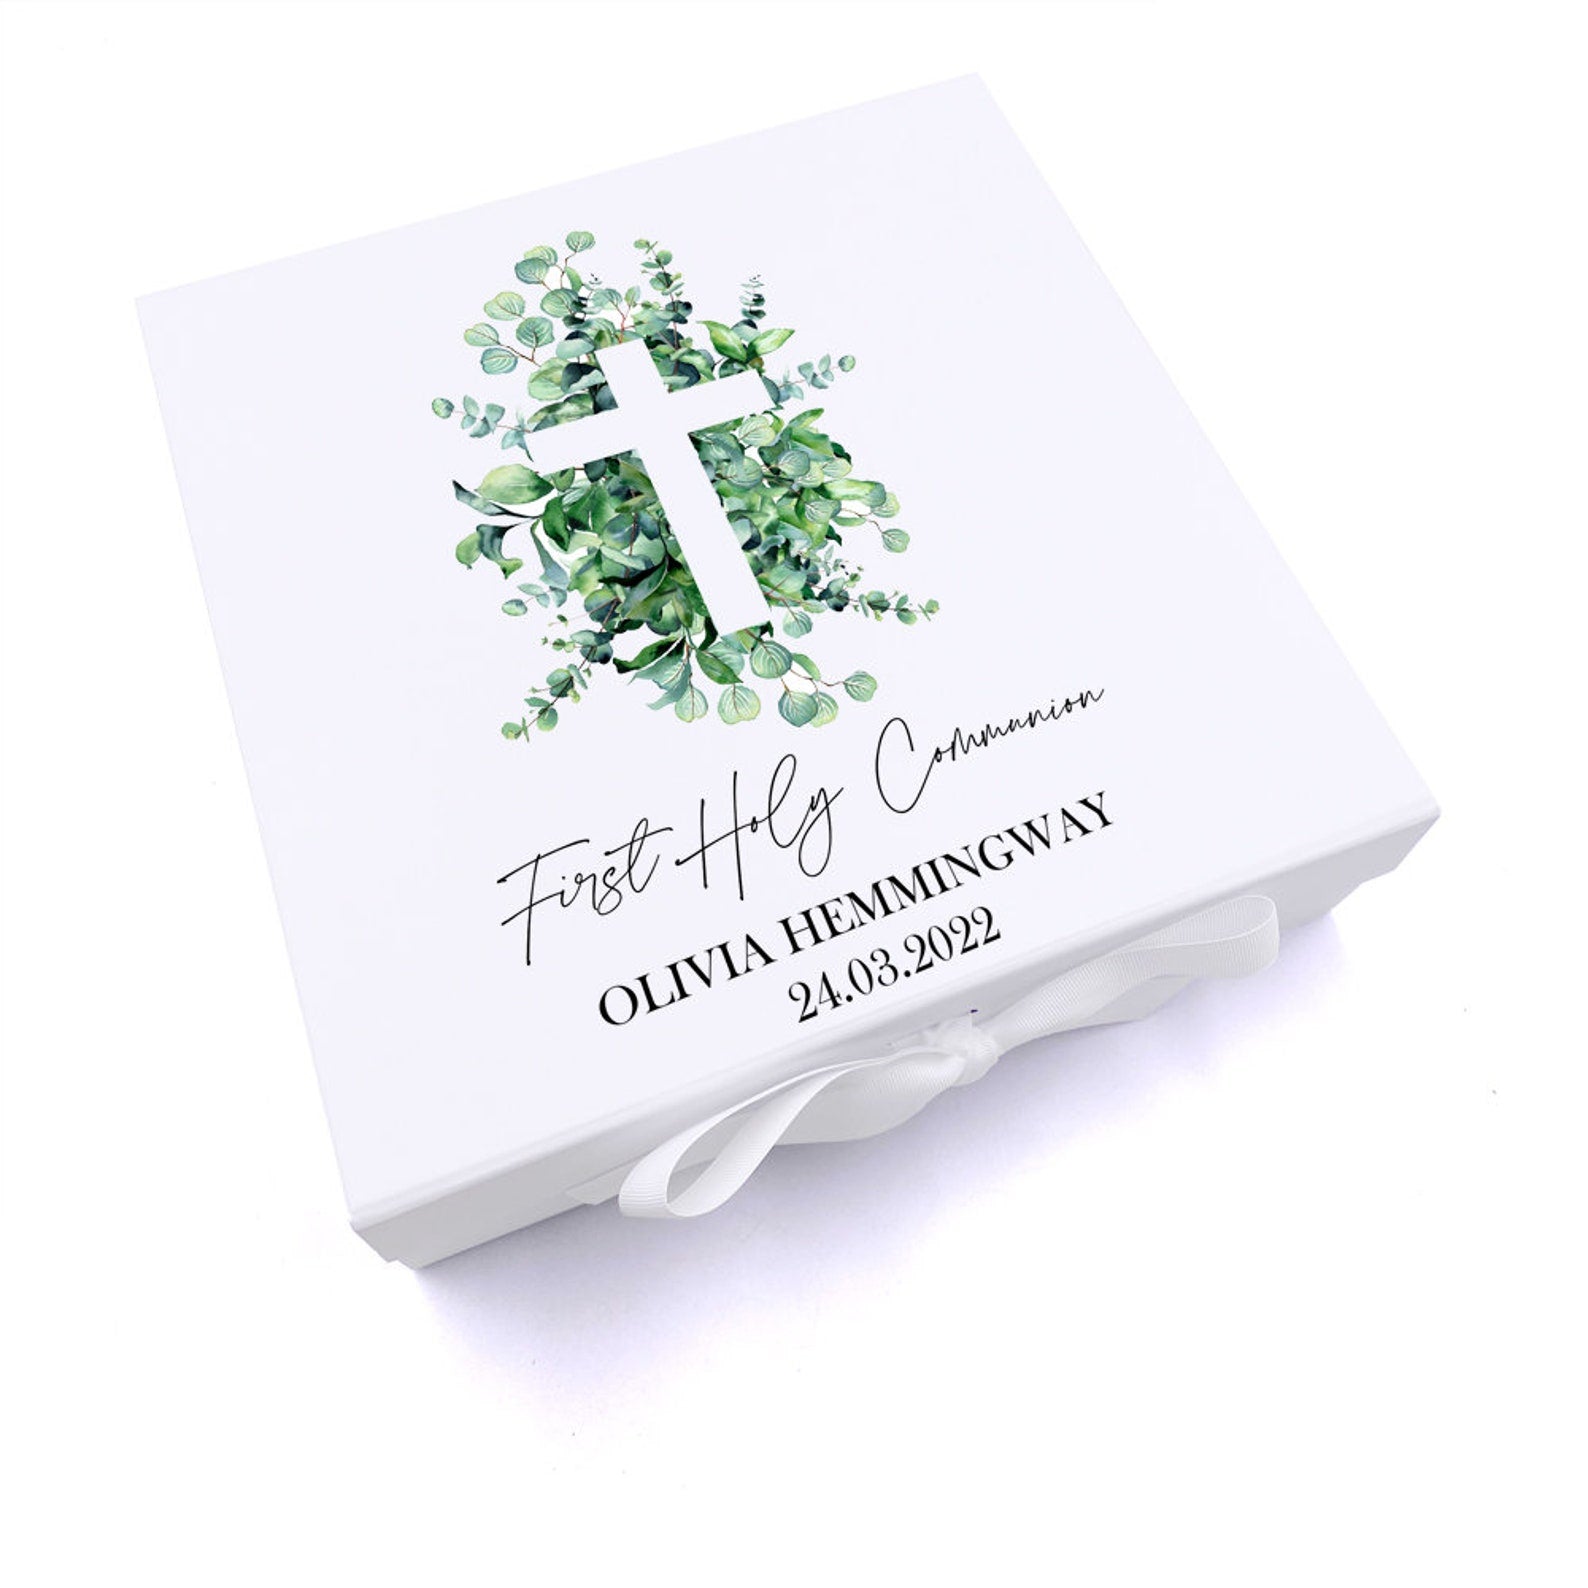 Personalised First Holy Communion Keepsake Box Gift With Cross and Eucalyptus